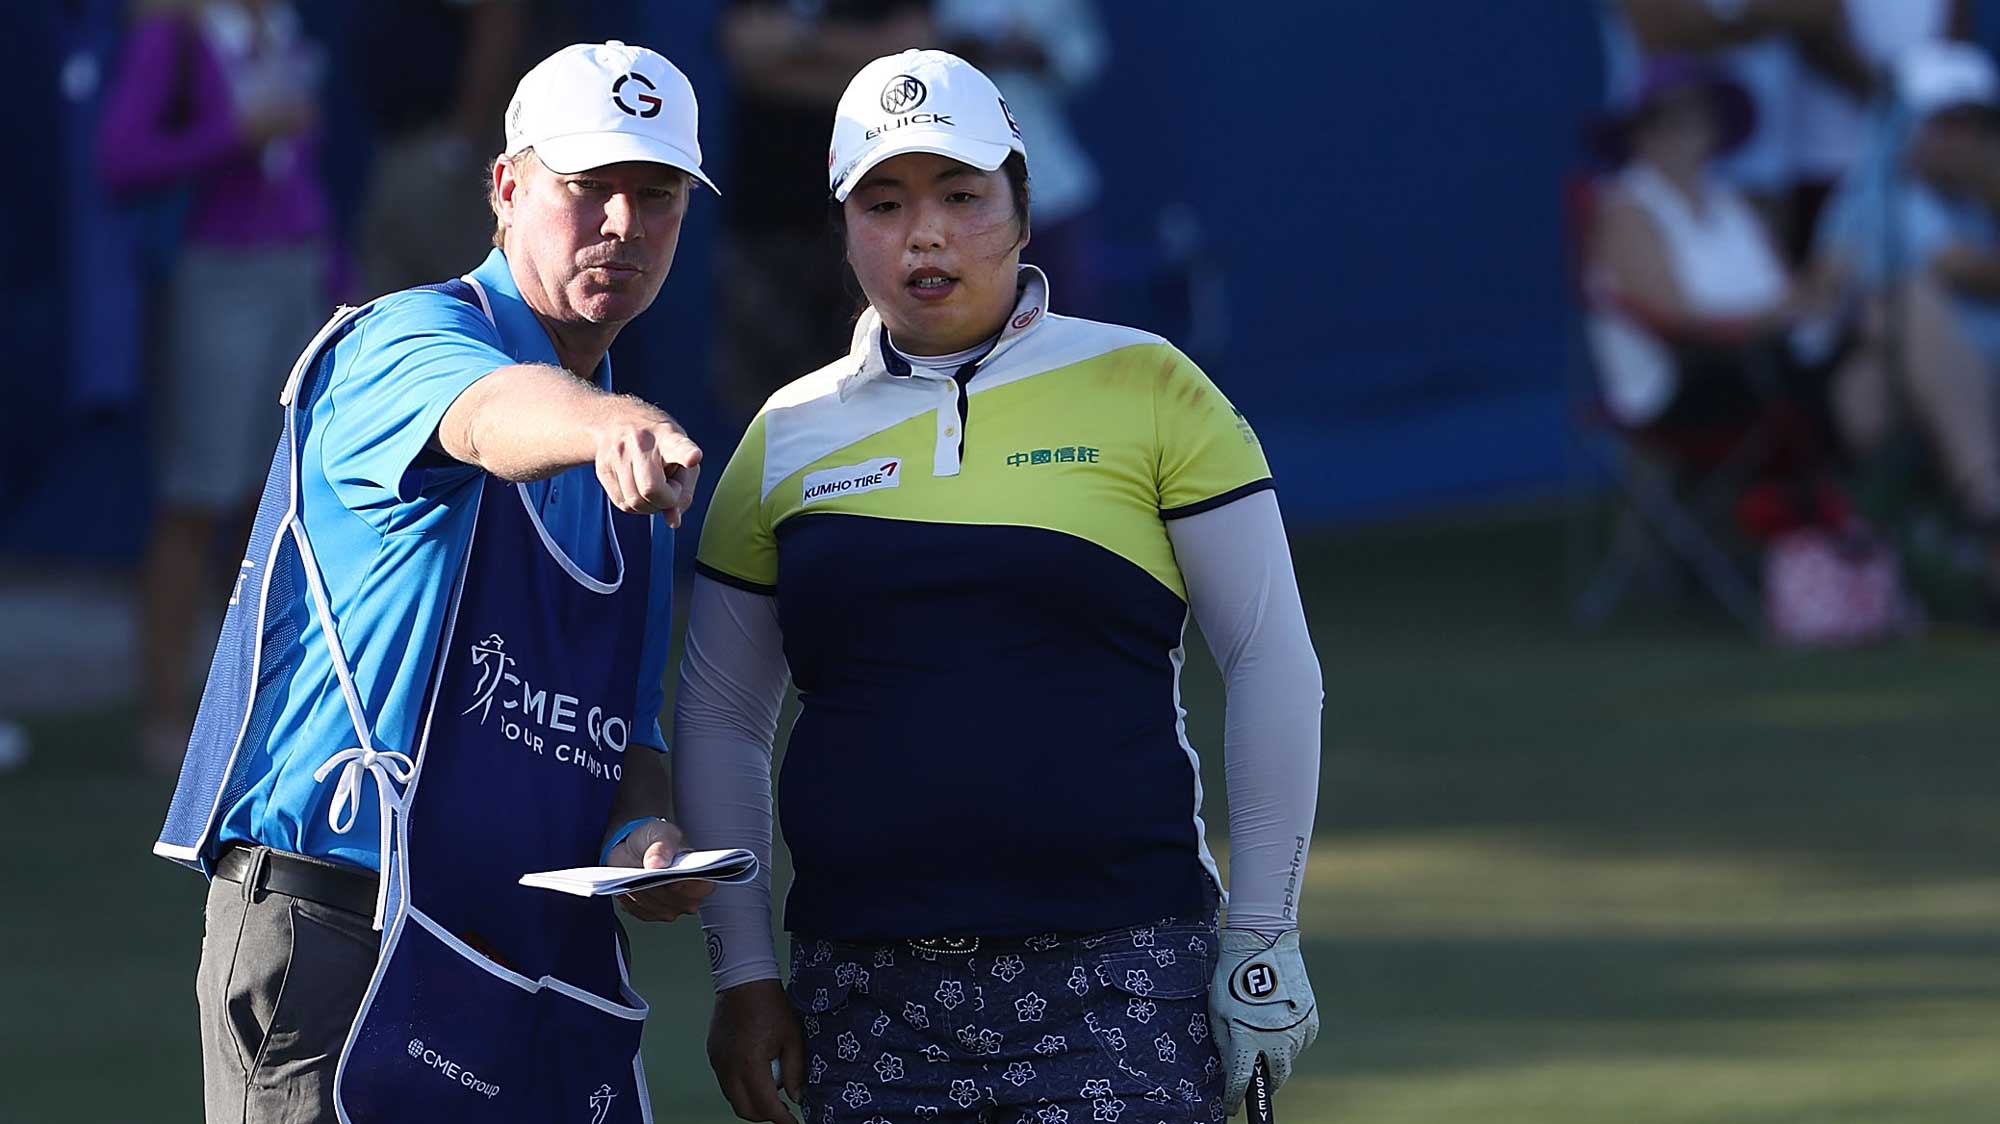 Shanshan Feng of China prepares to play her shot on the second hole during the first round of the CME Group Tour Championship at Tiburon Golf Club